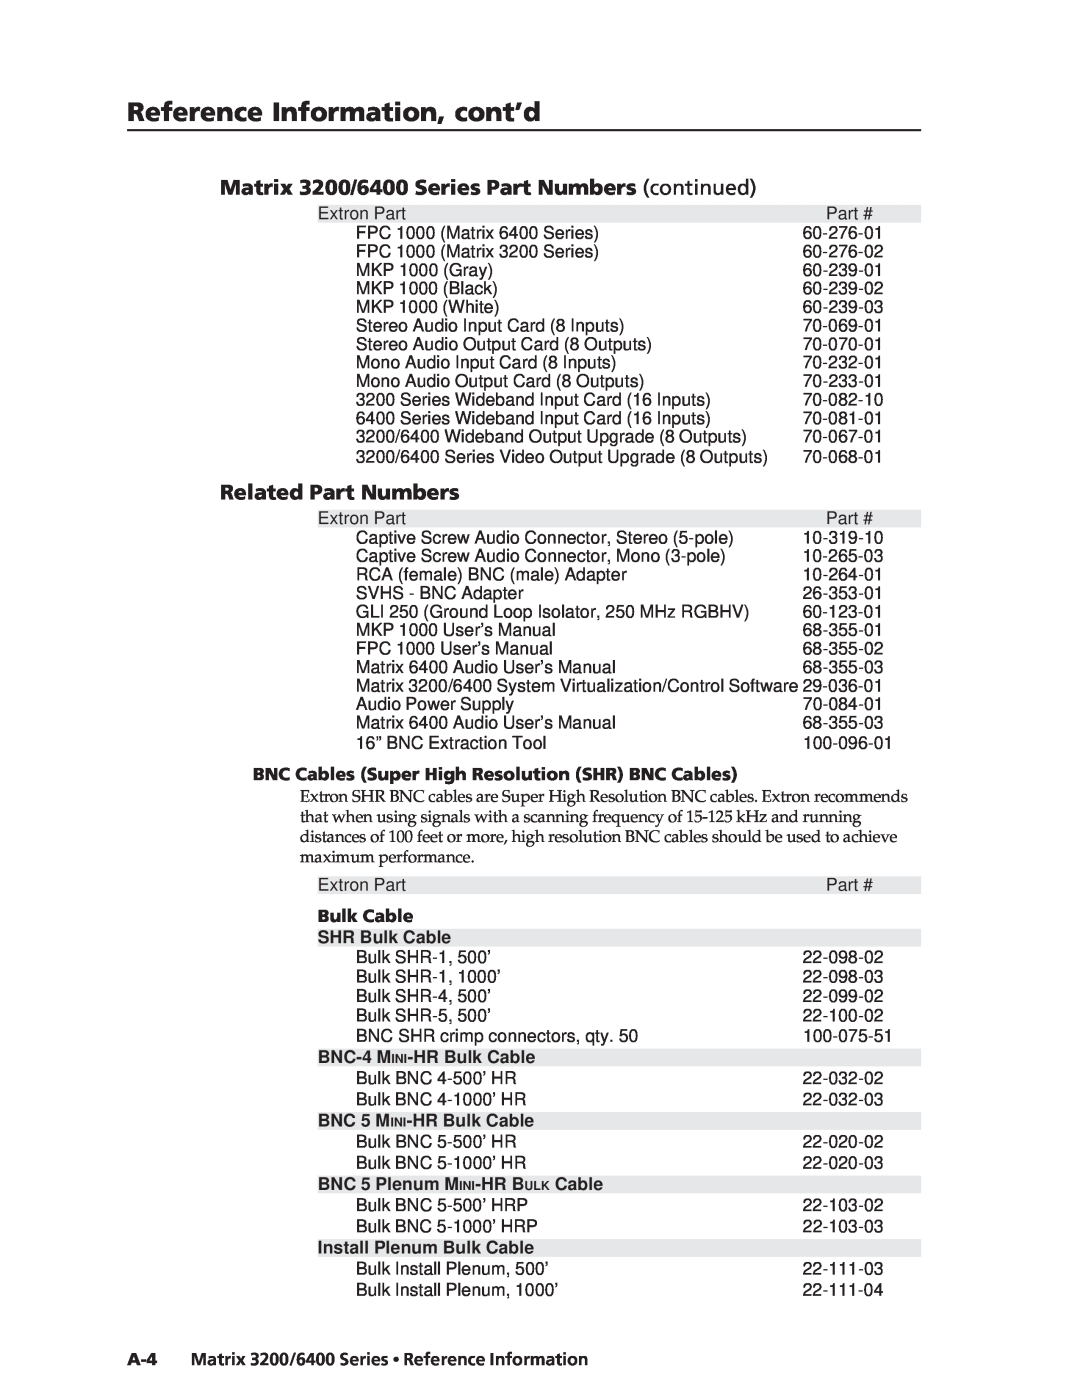 Extron electronic 3200s manual Reference Information, cont’d, Matrix 3200/6400 Series Part Numbers continued, Bulk Cable 